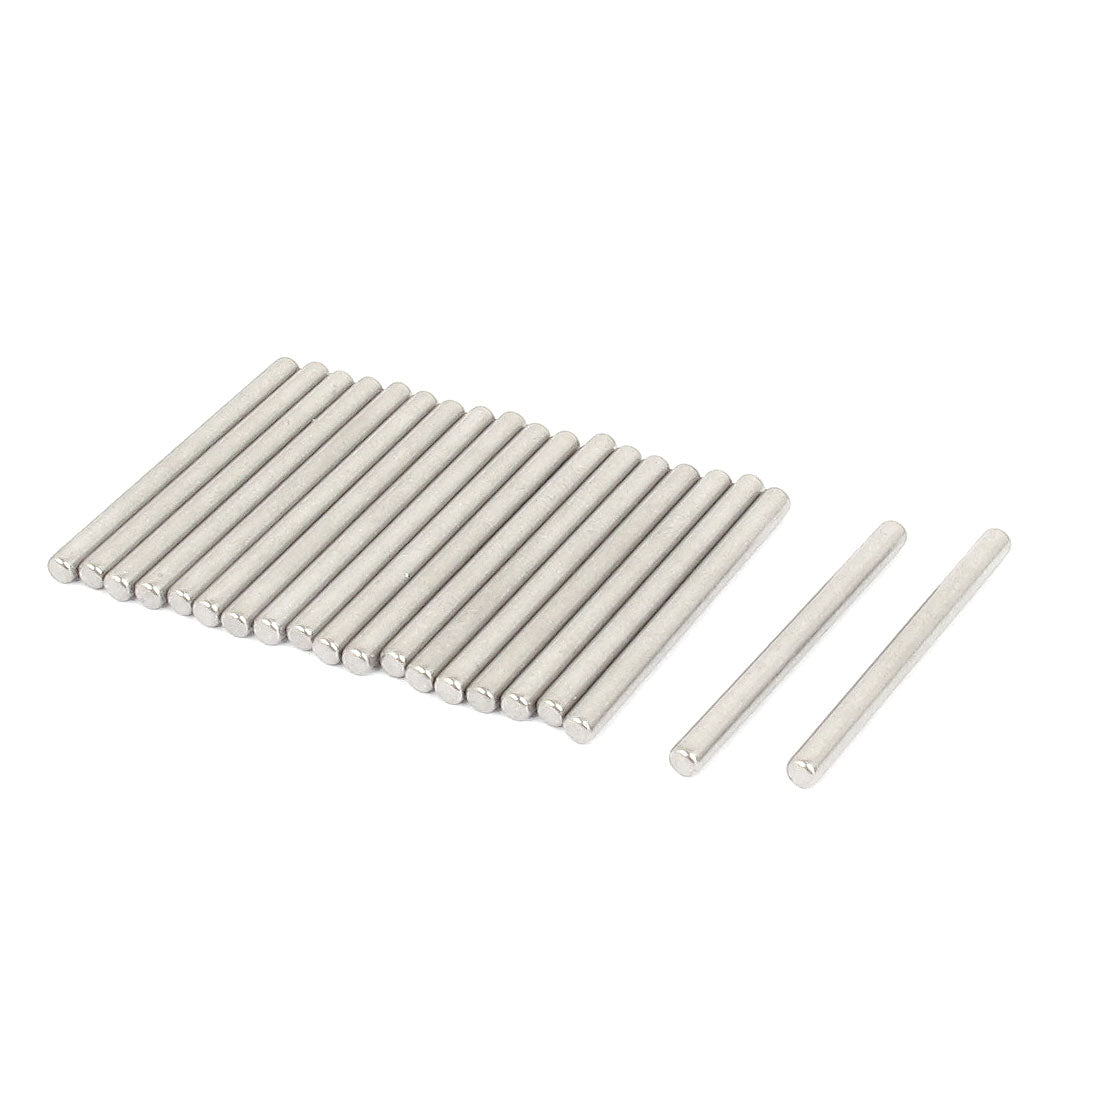 uxcell Uxcell 2.5mm x 30mm 304 Stainless Steel Dowel Pins Fasten Elements Silver Tone 20pcs